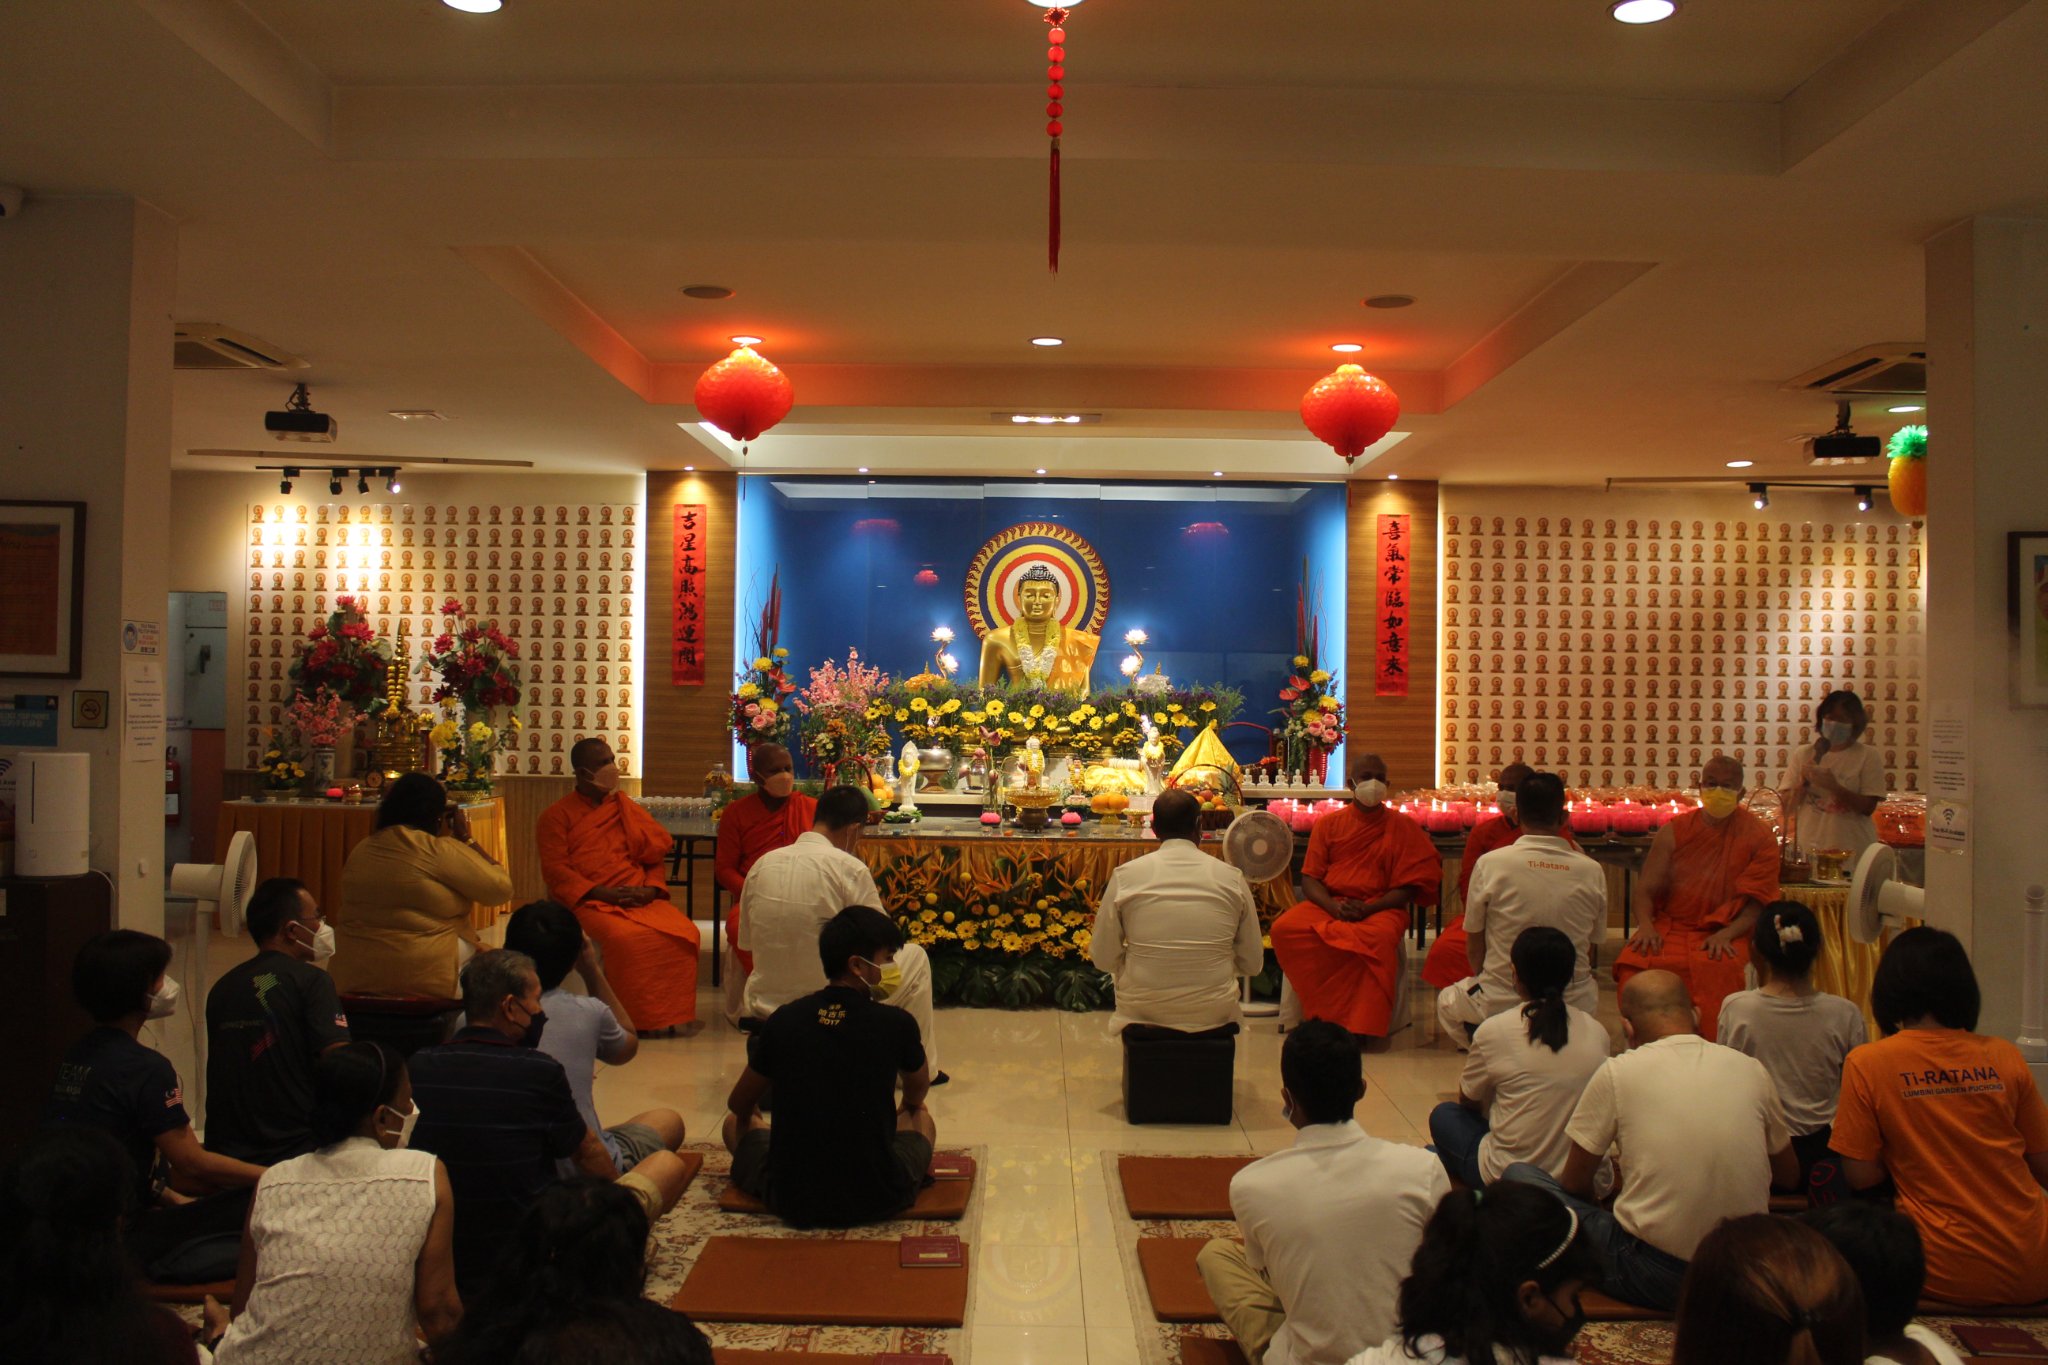 Wesak day celebrations to return in full swing after 3 years of covid restrictions